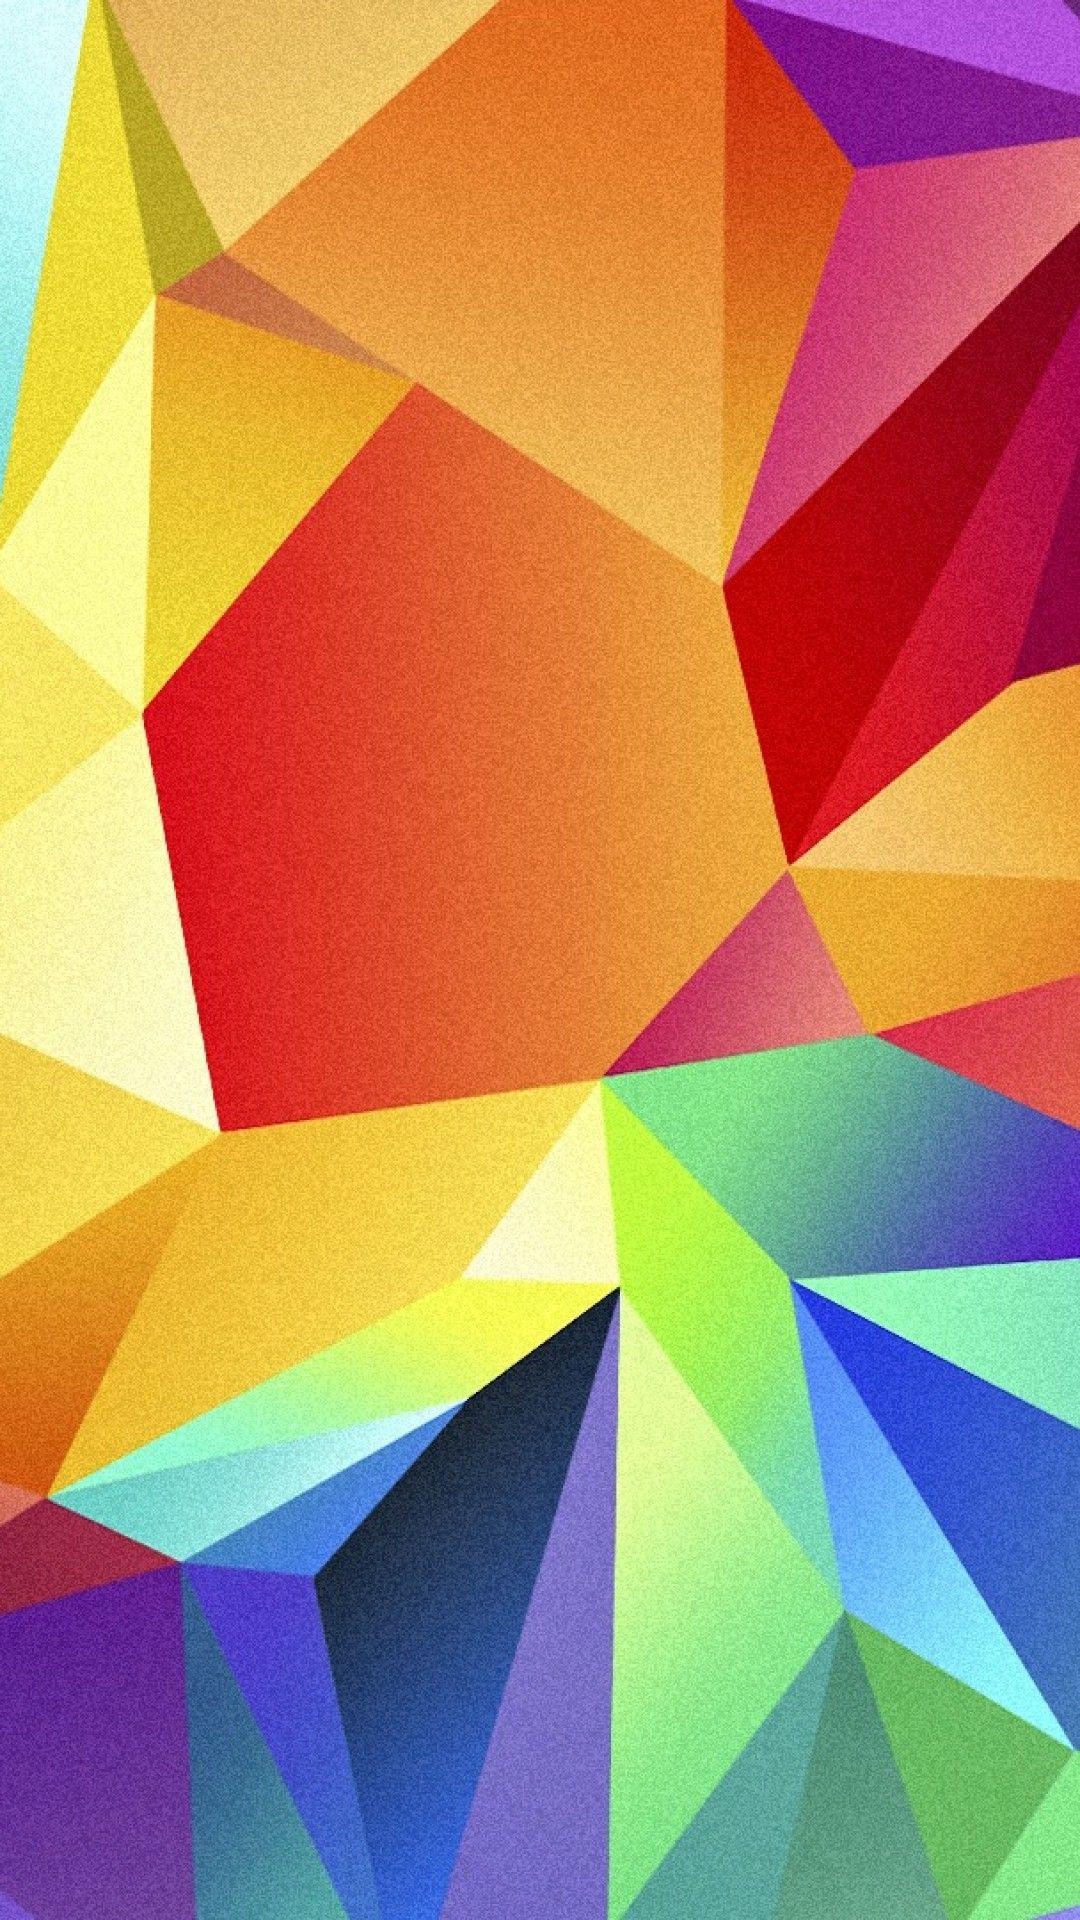 Wallpaper polygon, 4k, HD wallpaper, android, triangle, background, orange, red, blue, pattern, OS